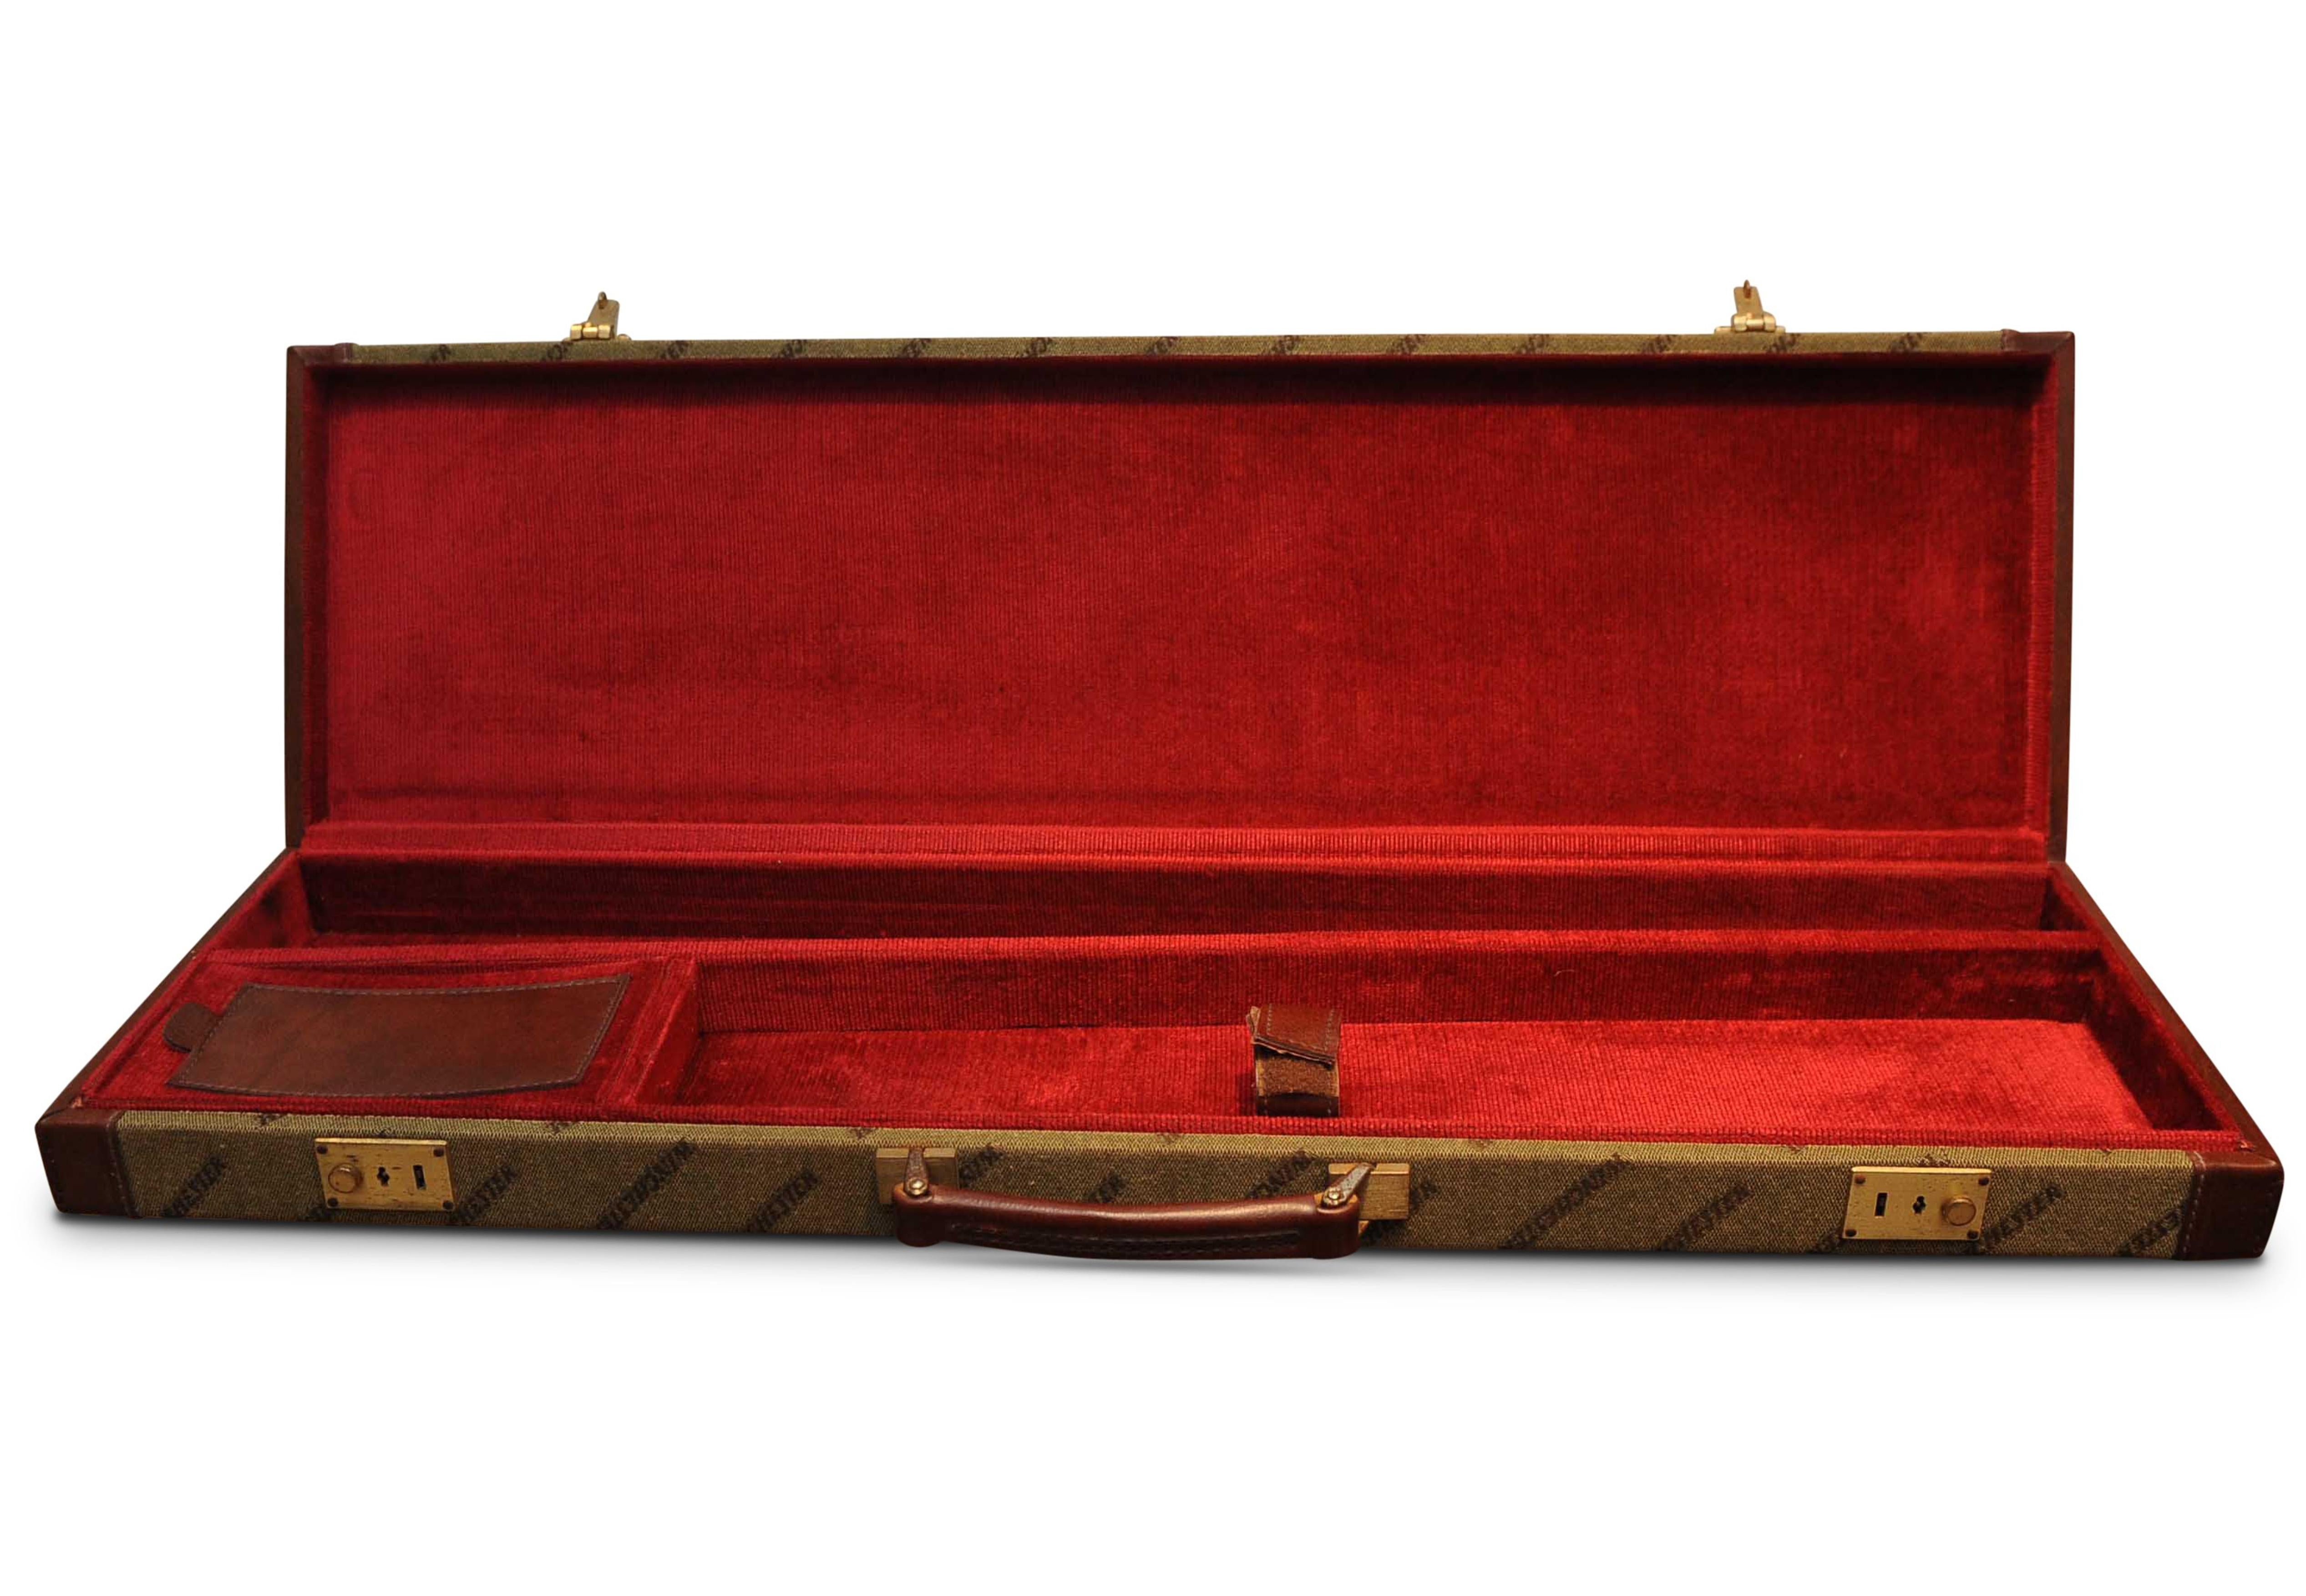 Winchester 4692 Embossed Hard Gun Case with Leather Handle Finished Brass Trim & Red Velvet Interior. 

Winchester rifle is a comprehensive term describing a series of lever action repeating rifles manufactured by the Winchester Repeating Arms